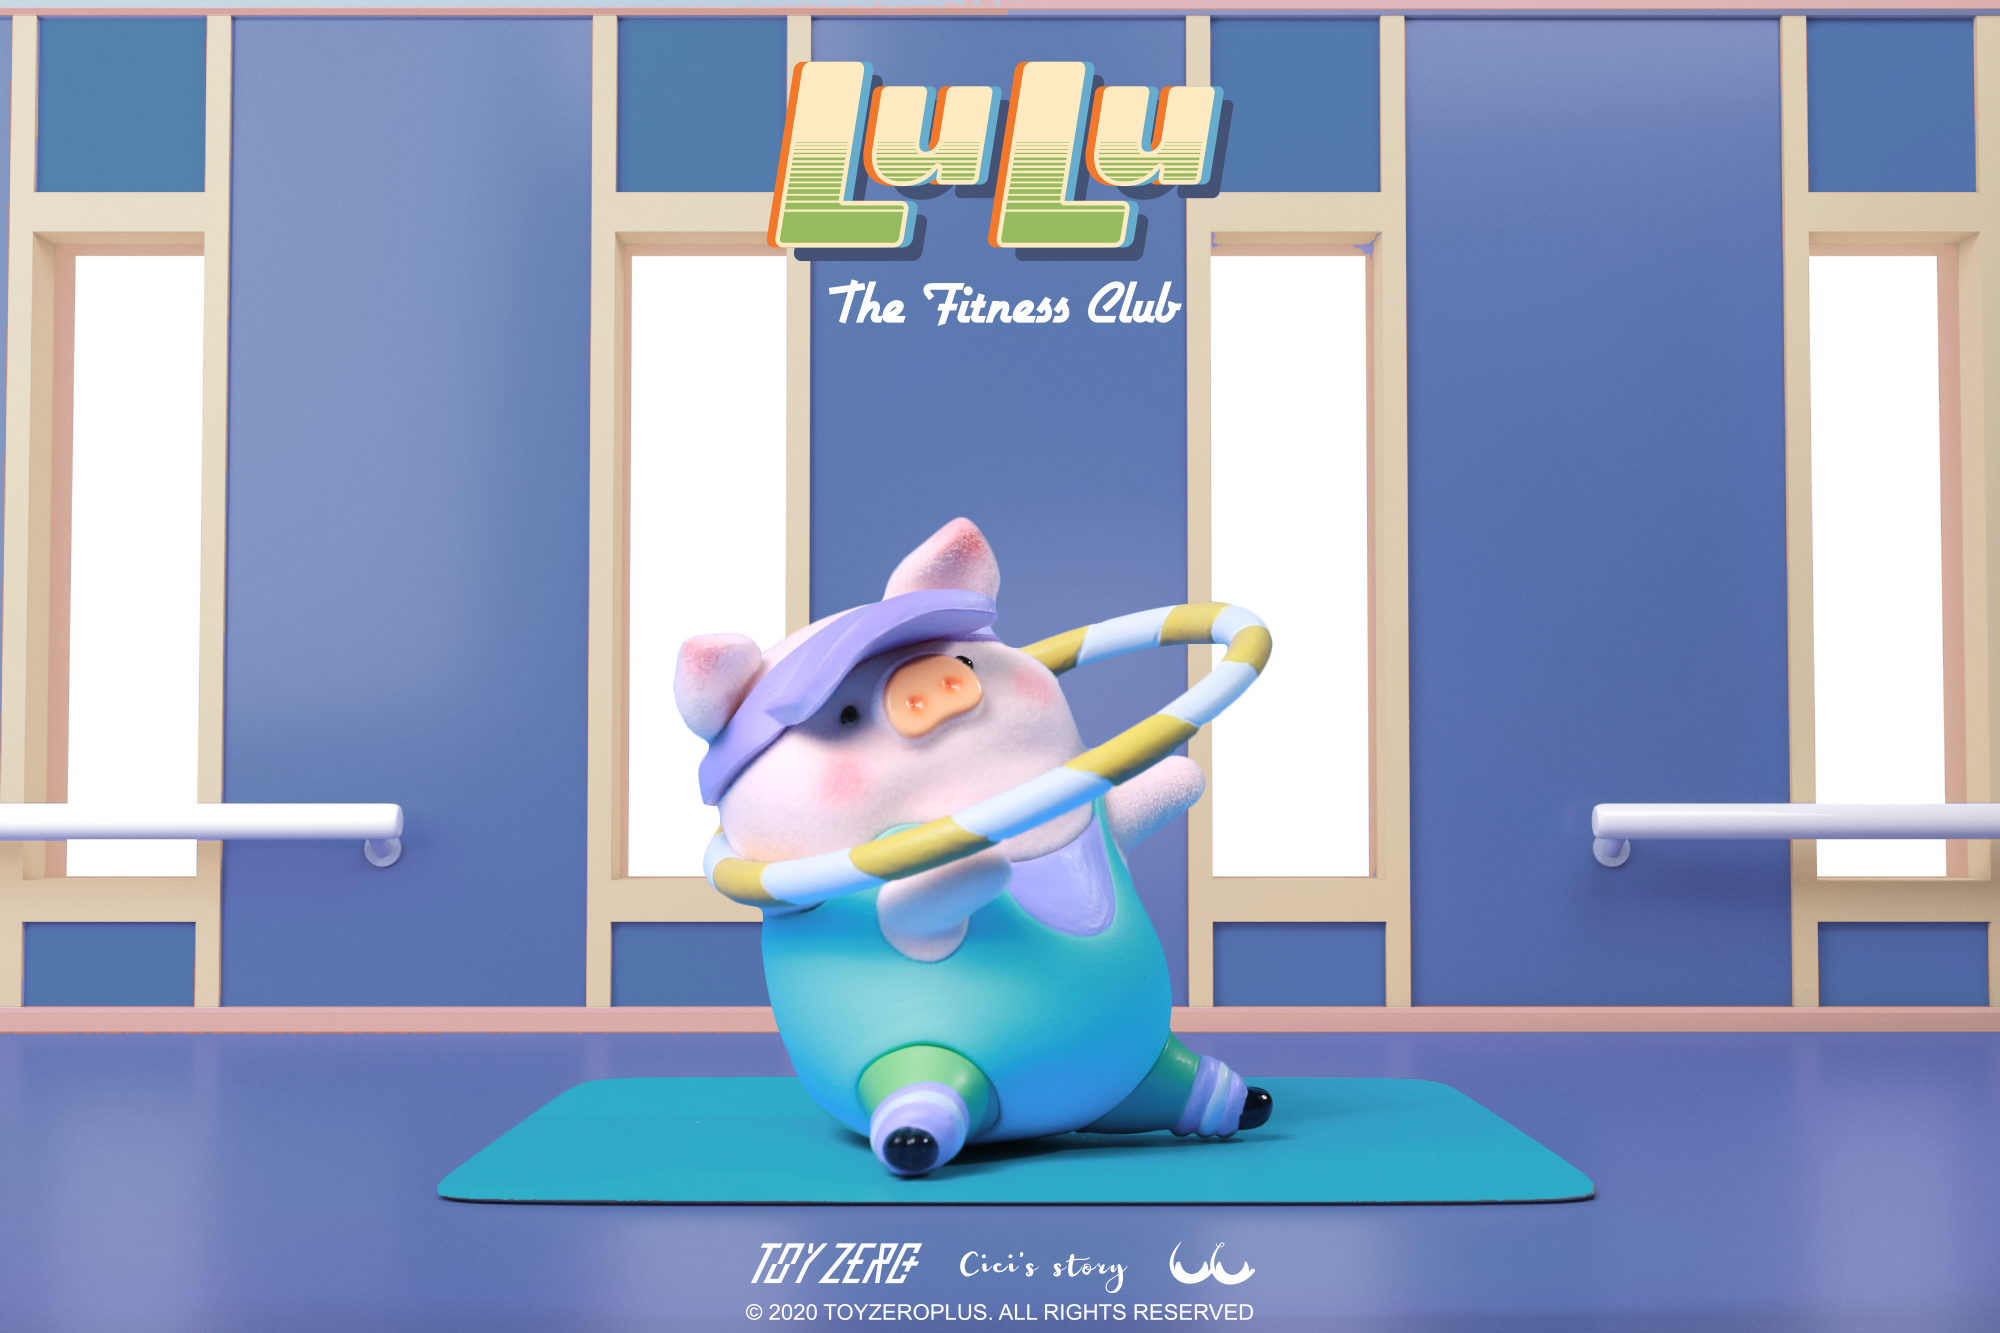 LULU the piggy - The Fitness Club Series Blind Box Set by Cici’s Story